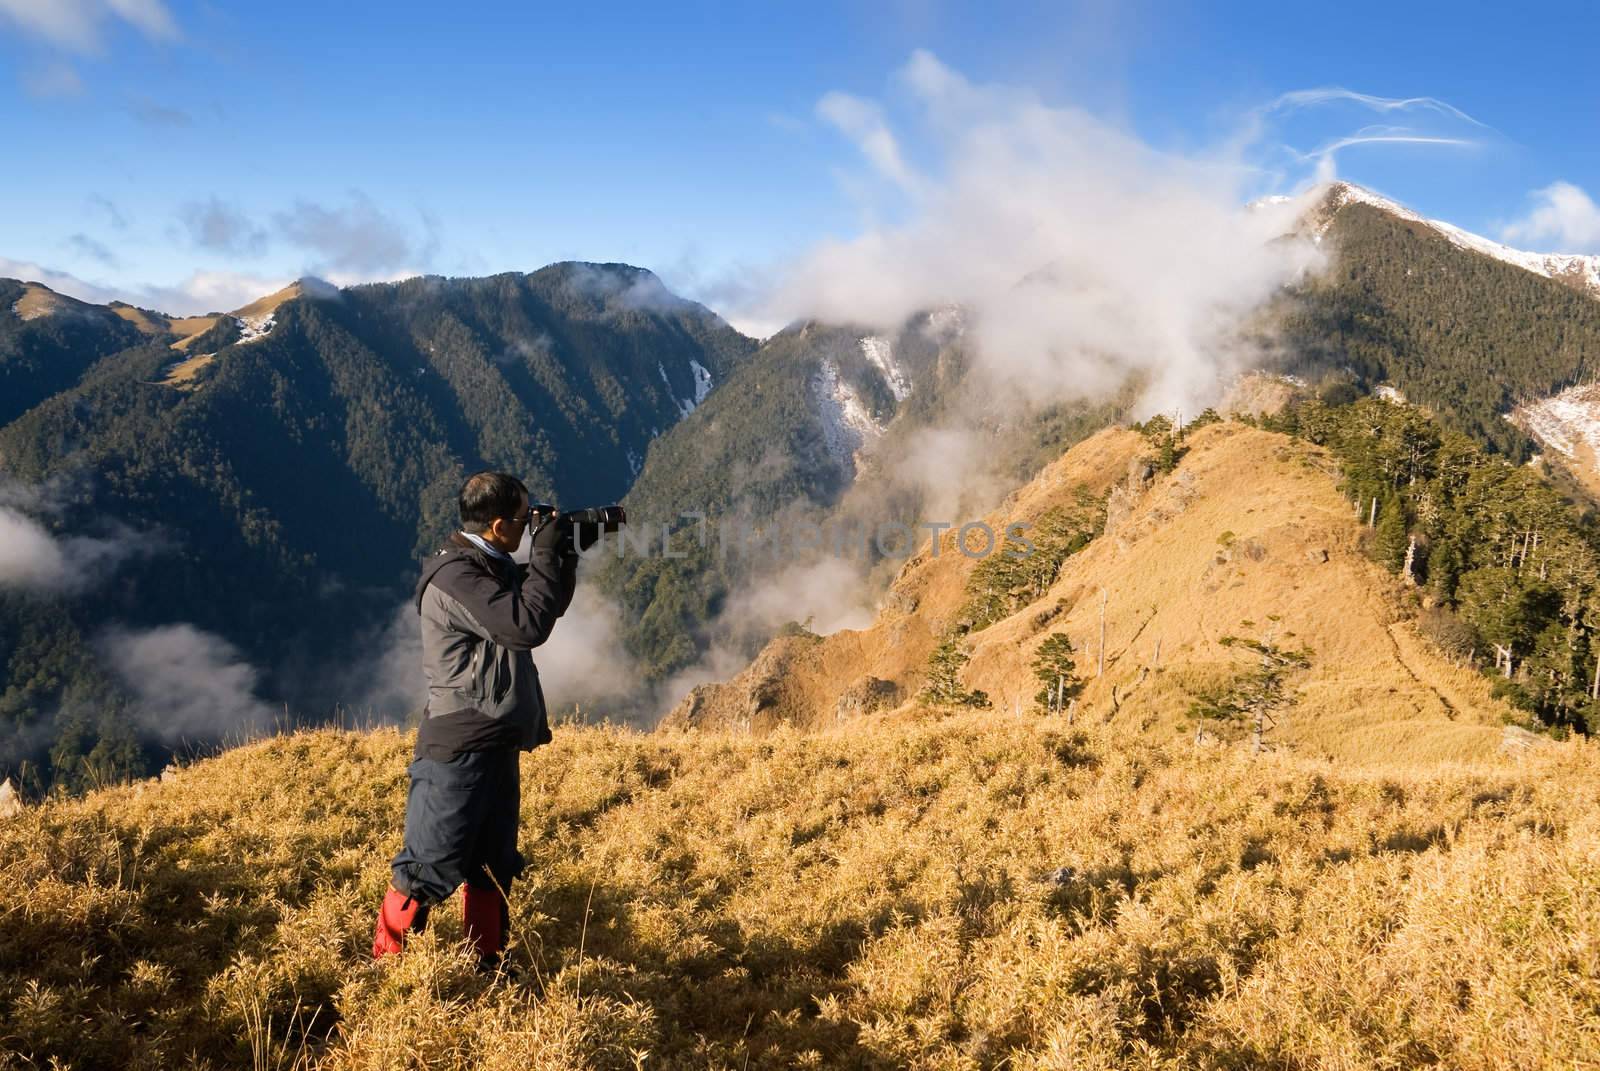 Outdoor photographer with dramatic mountain scenery in Taiwan, Asia.